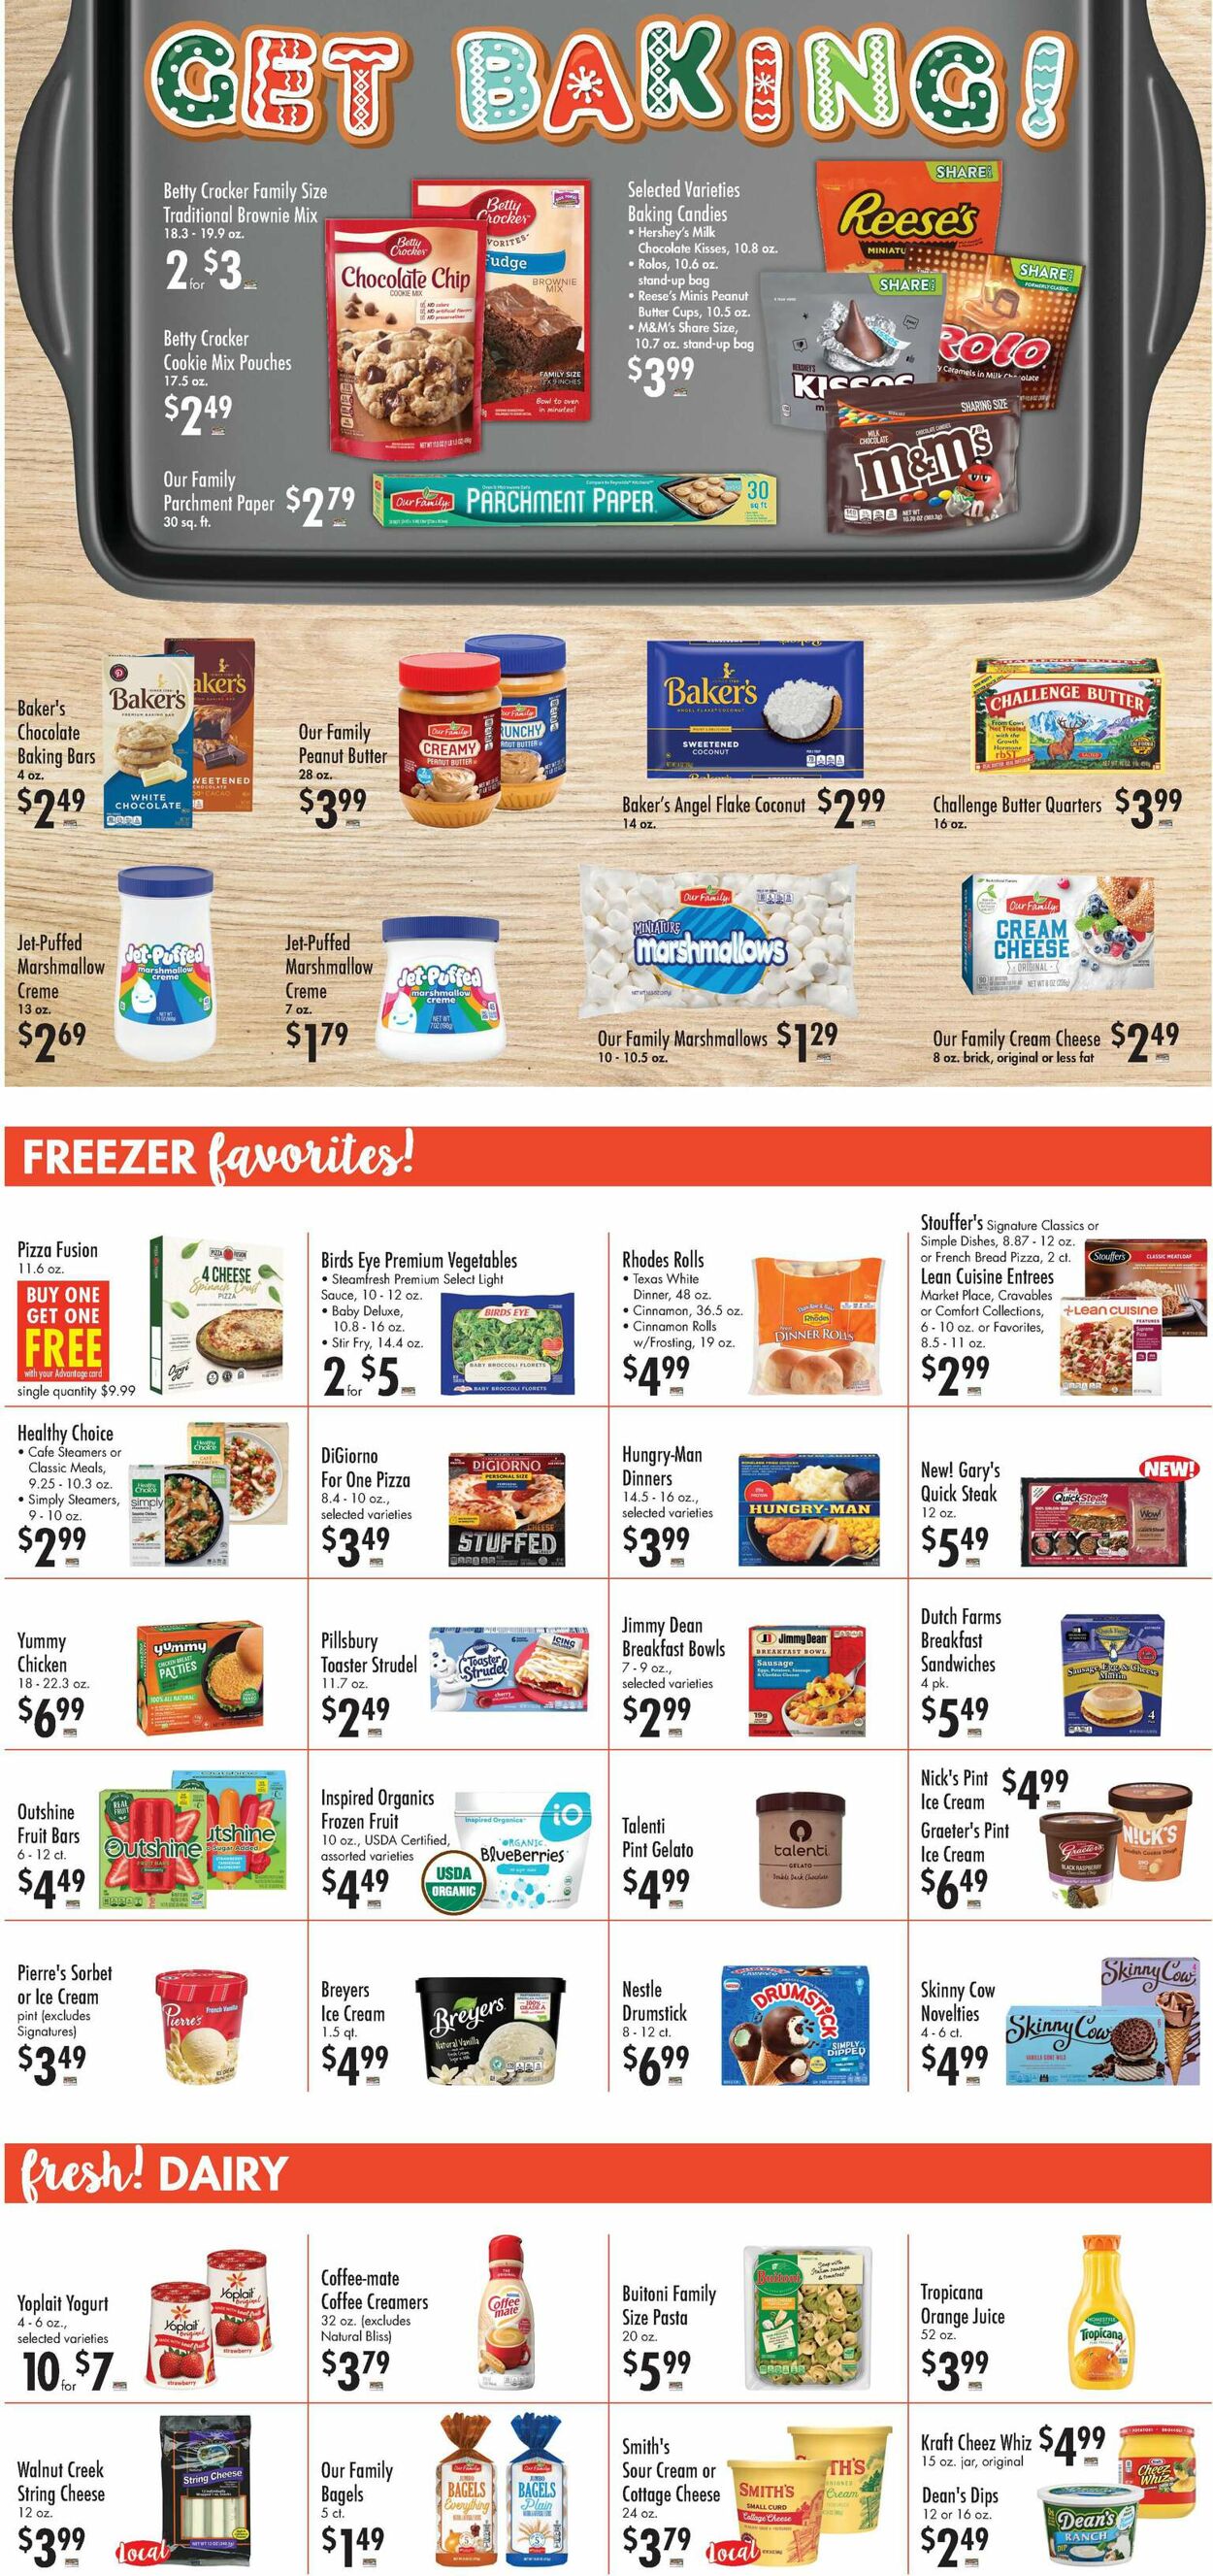 Catalogue Buehler's Fresh Foods from 11/25/2022